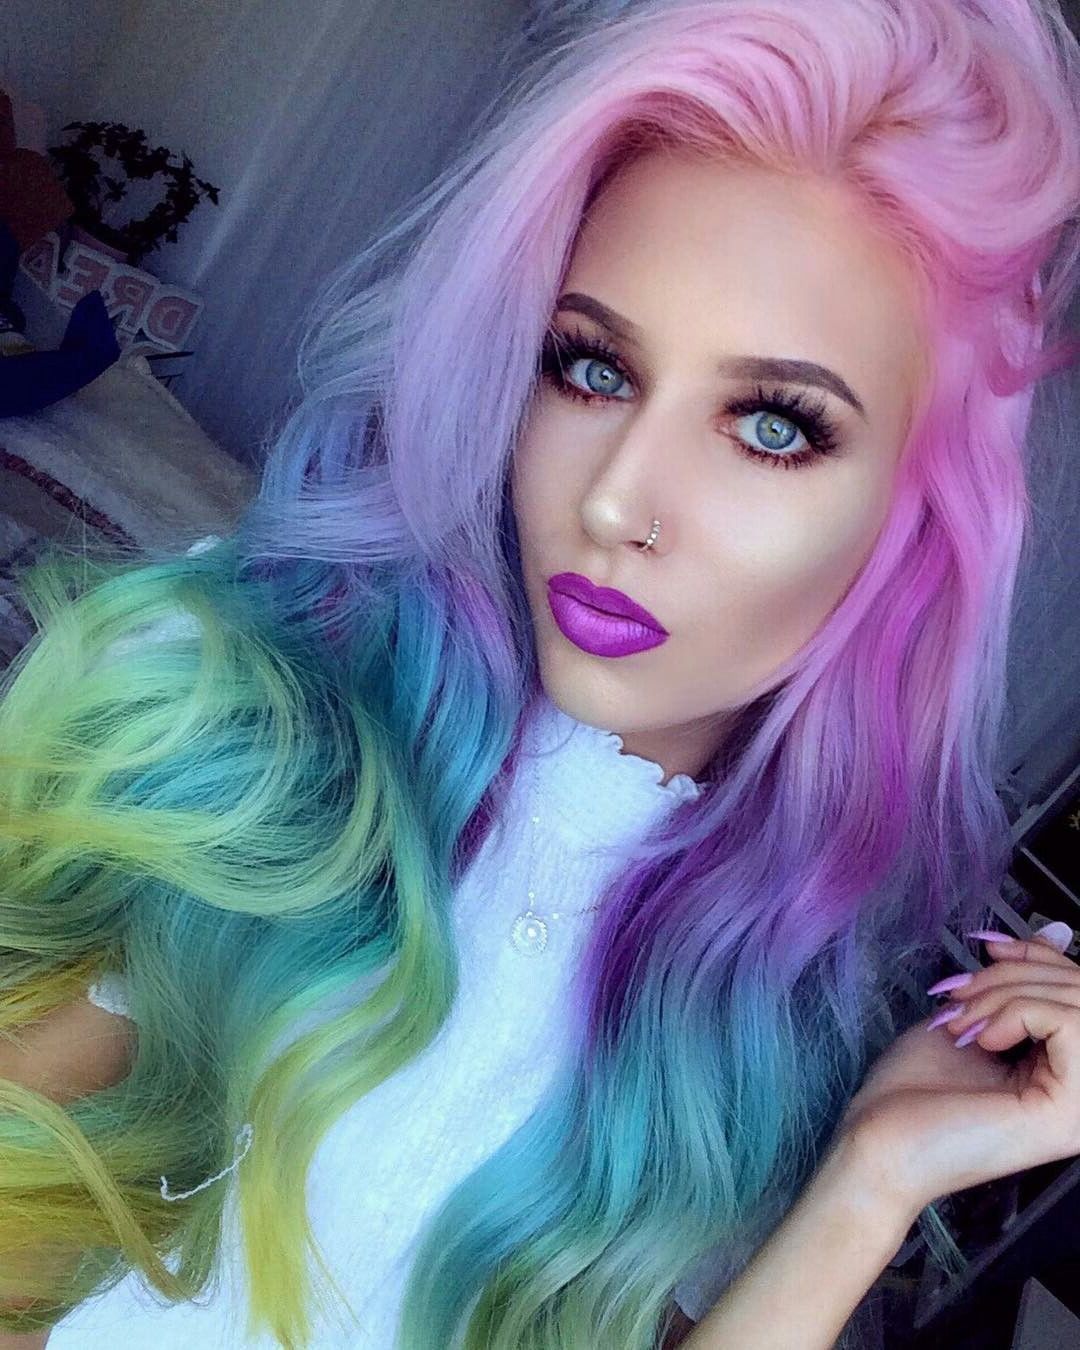 Pastel Rainbow Hair With Regard To Popular Pastel Rainbow Colored Curls Hairstyles (Gallery 20 of 20)